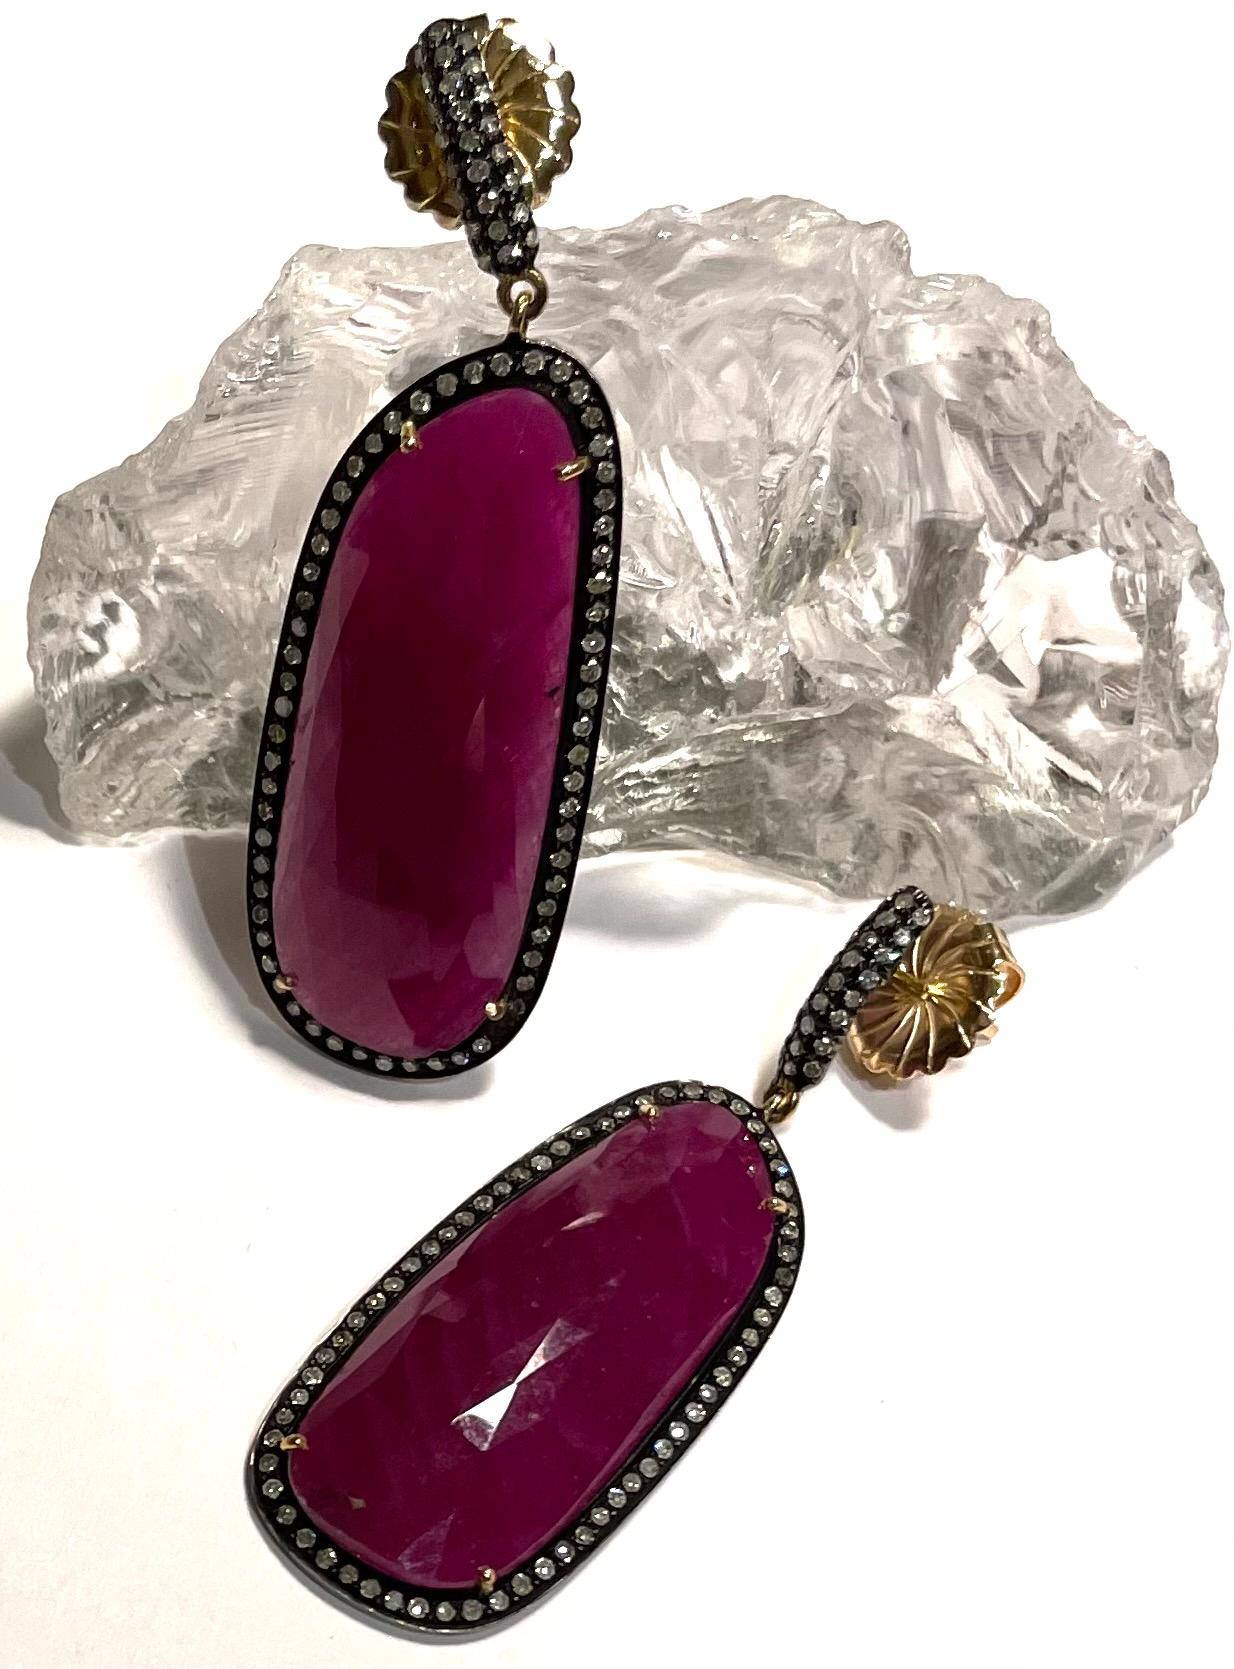 Description
Beautiful 44 carat Ruby earrings framed with pave diamonds
Item # E2788

Materials and Weight
Ruby, 14 x 33mm 43.15 carats, faceted.
Pave diamonds, 0.86 carats.
Posts and jumbo backs, 14k gold.
Black Rhodium sterling